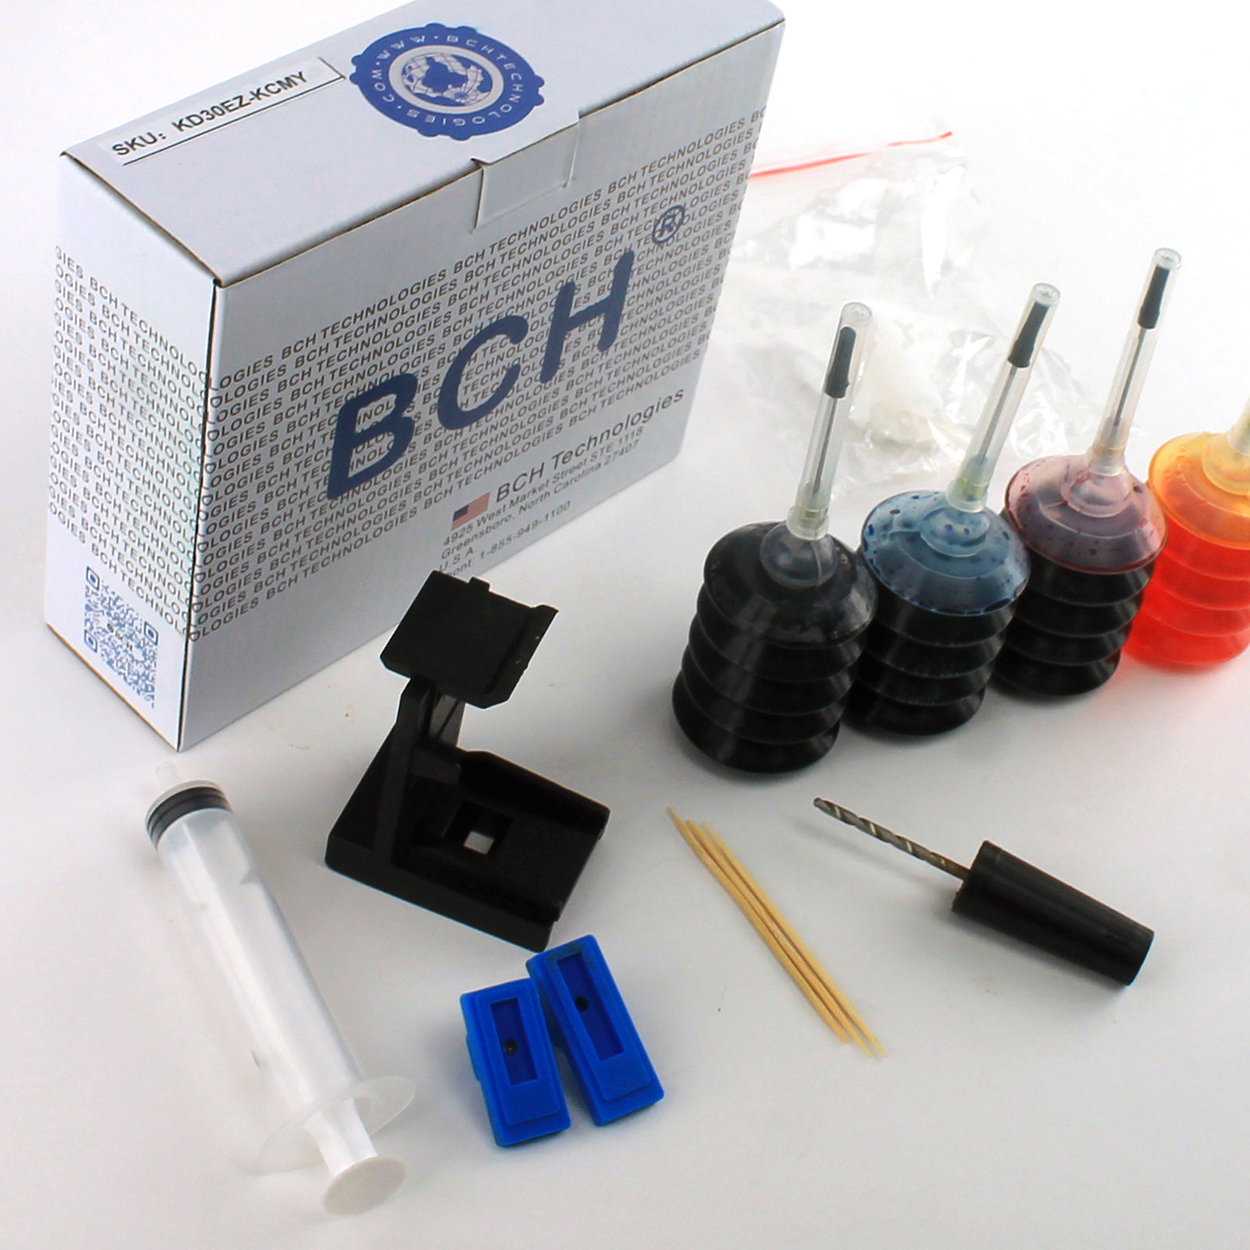 BCH First-Timer Printer Ink Refill Kit for 21, 56, 60, 61, 62, 65, 74, 75, 93, 95, 96, 97, 901 - 1 pack of EZ30-T - image 4 of 4